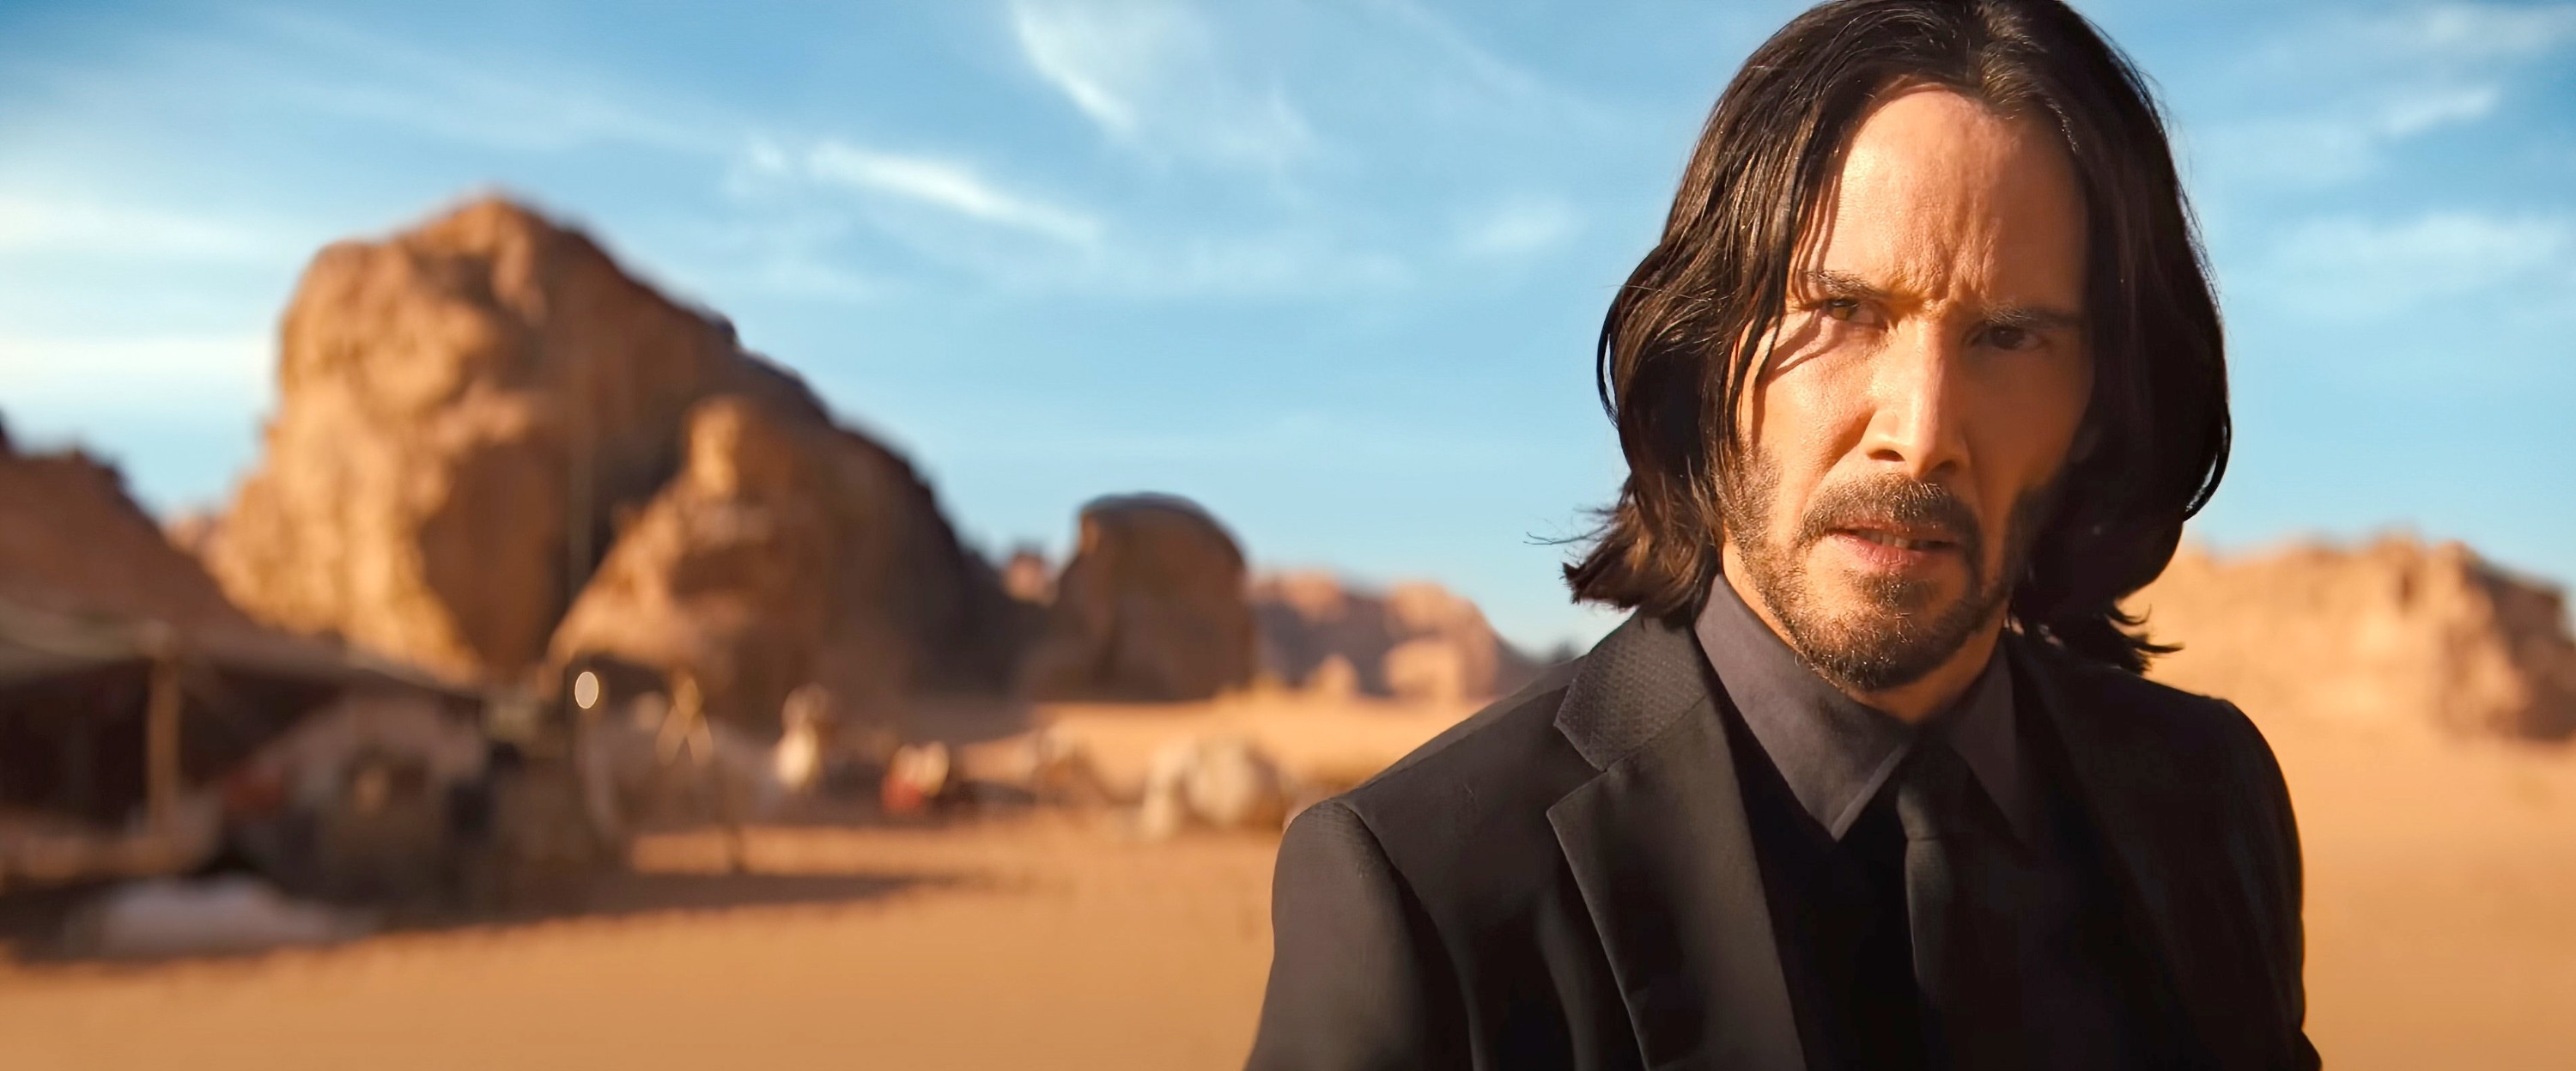 Keanu Reeves in a black suit standing in a desert with tents in the background